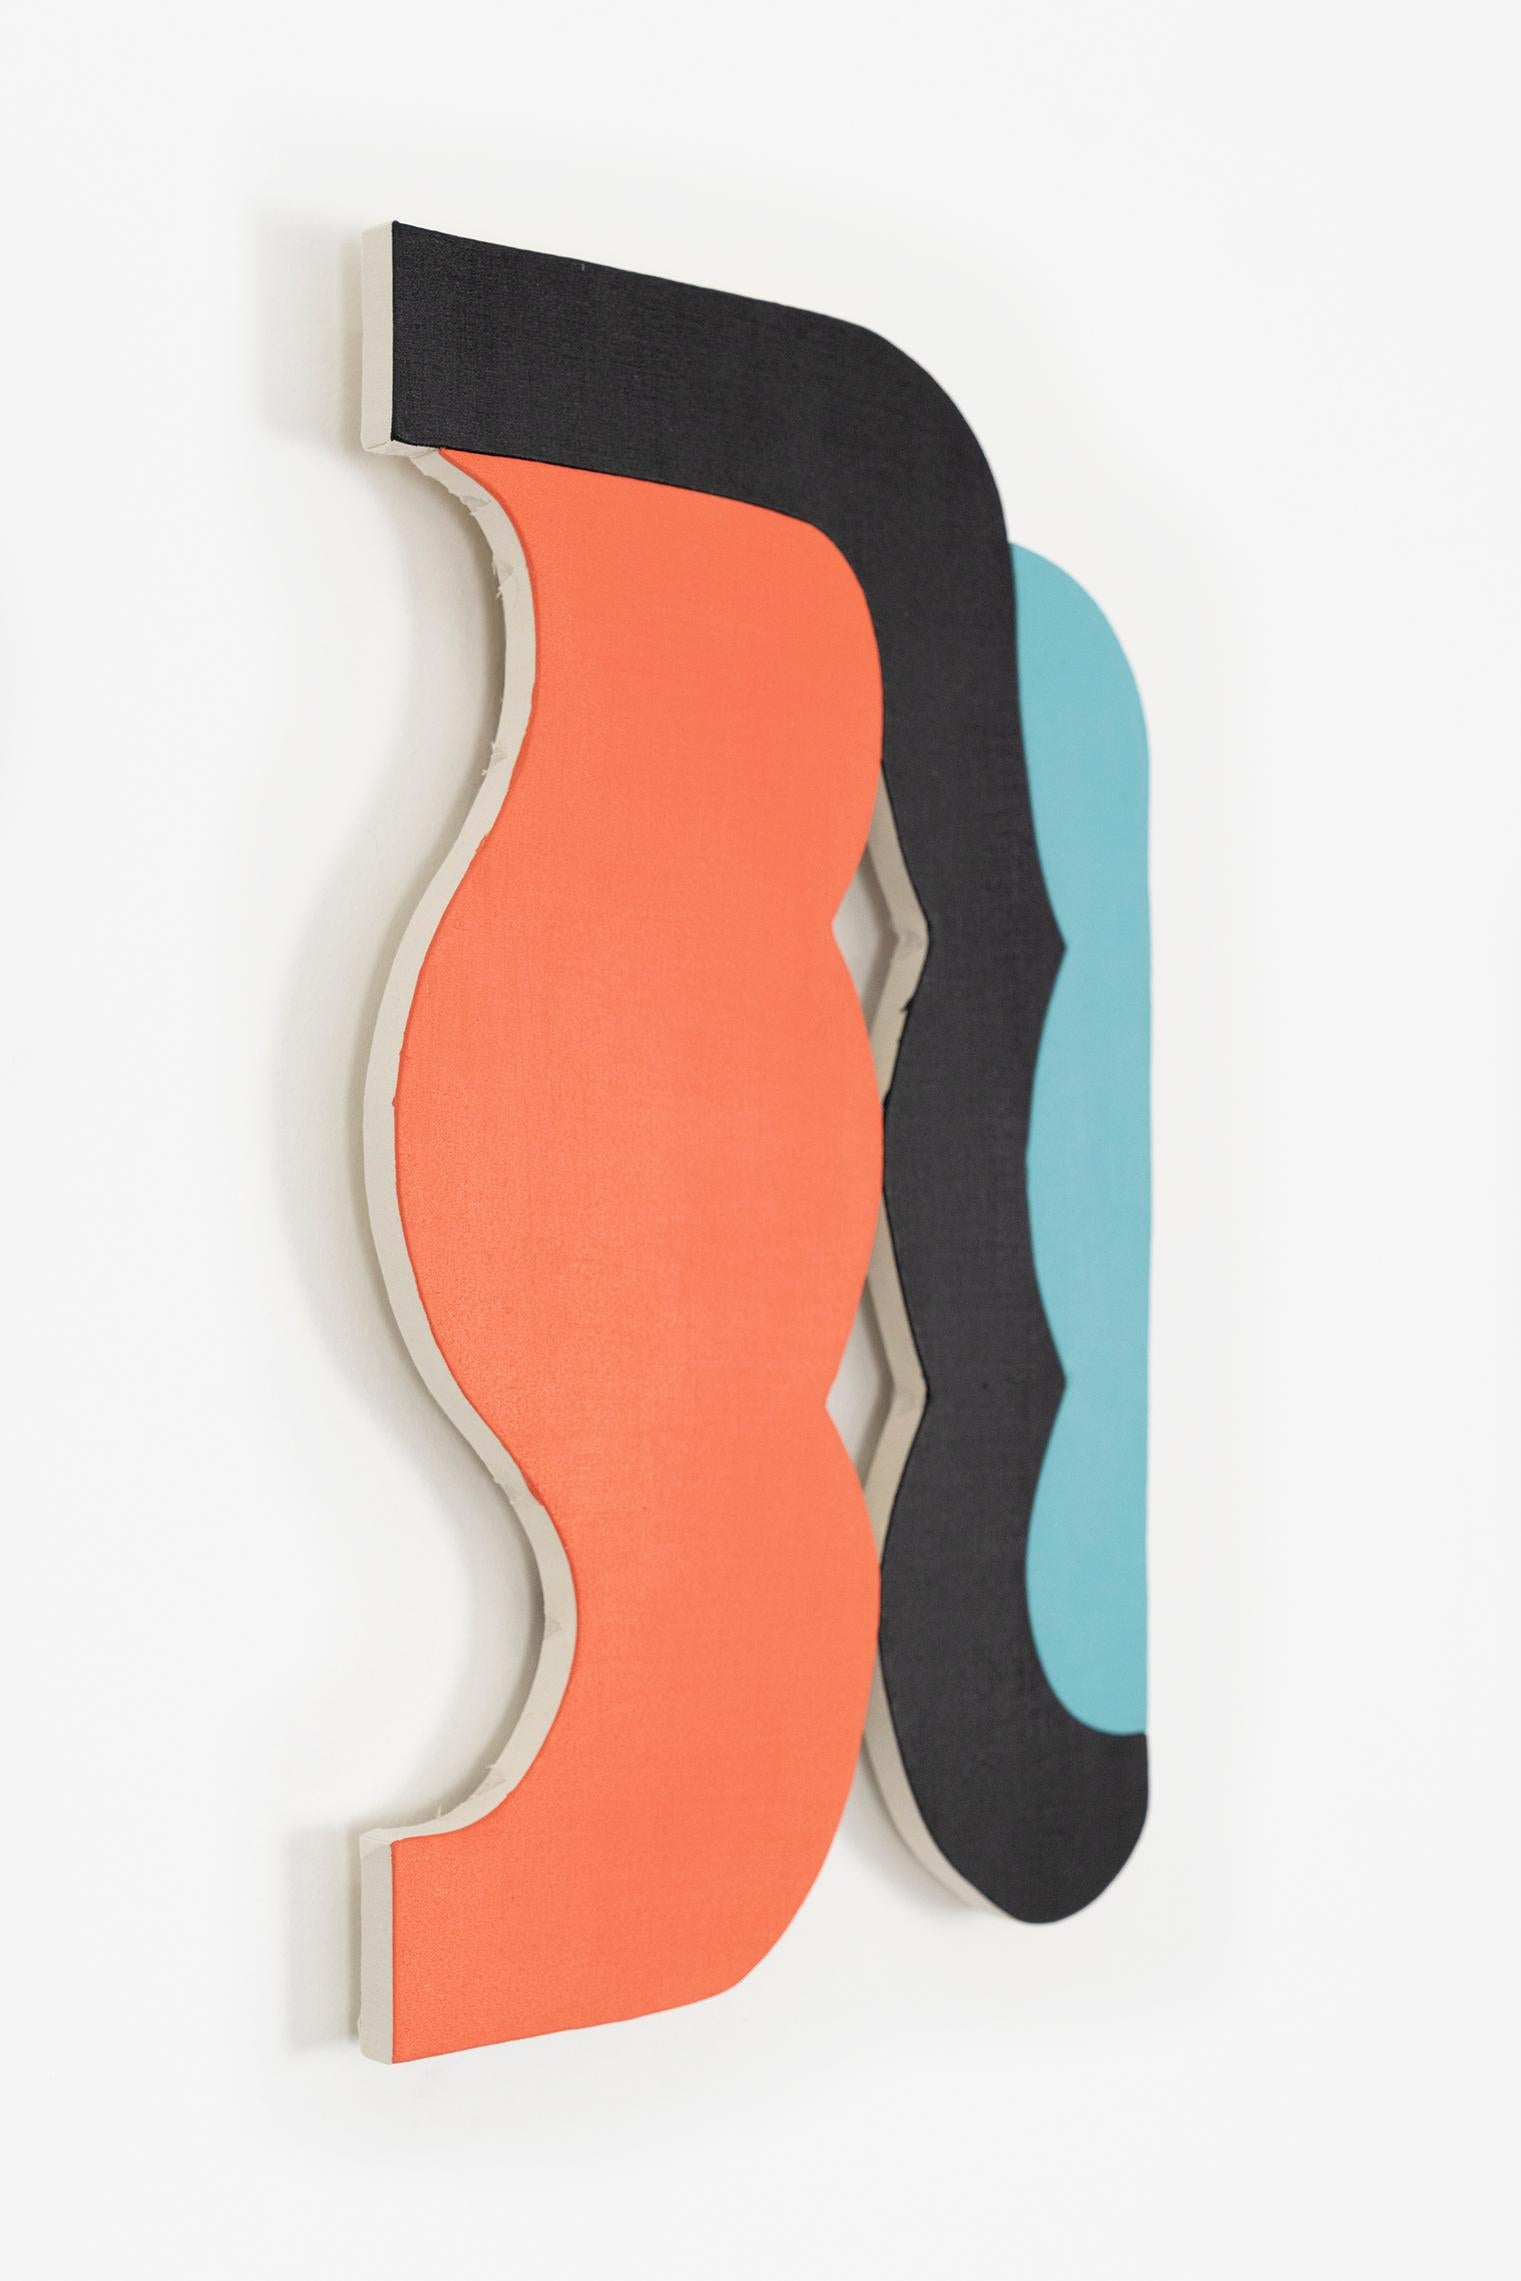 Untitled (21-9)
Acrylic on muslin over mdf 17.25” x 11.25”
2021


Jason Matherly is an Athens, GA based artist who produces shaped paintings with an emphasis on precise color combinations. His particolored objects are comprised of multiple elements,